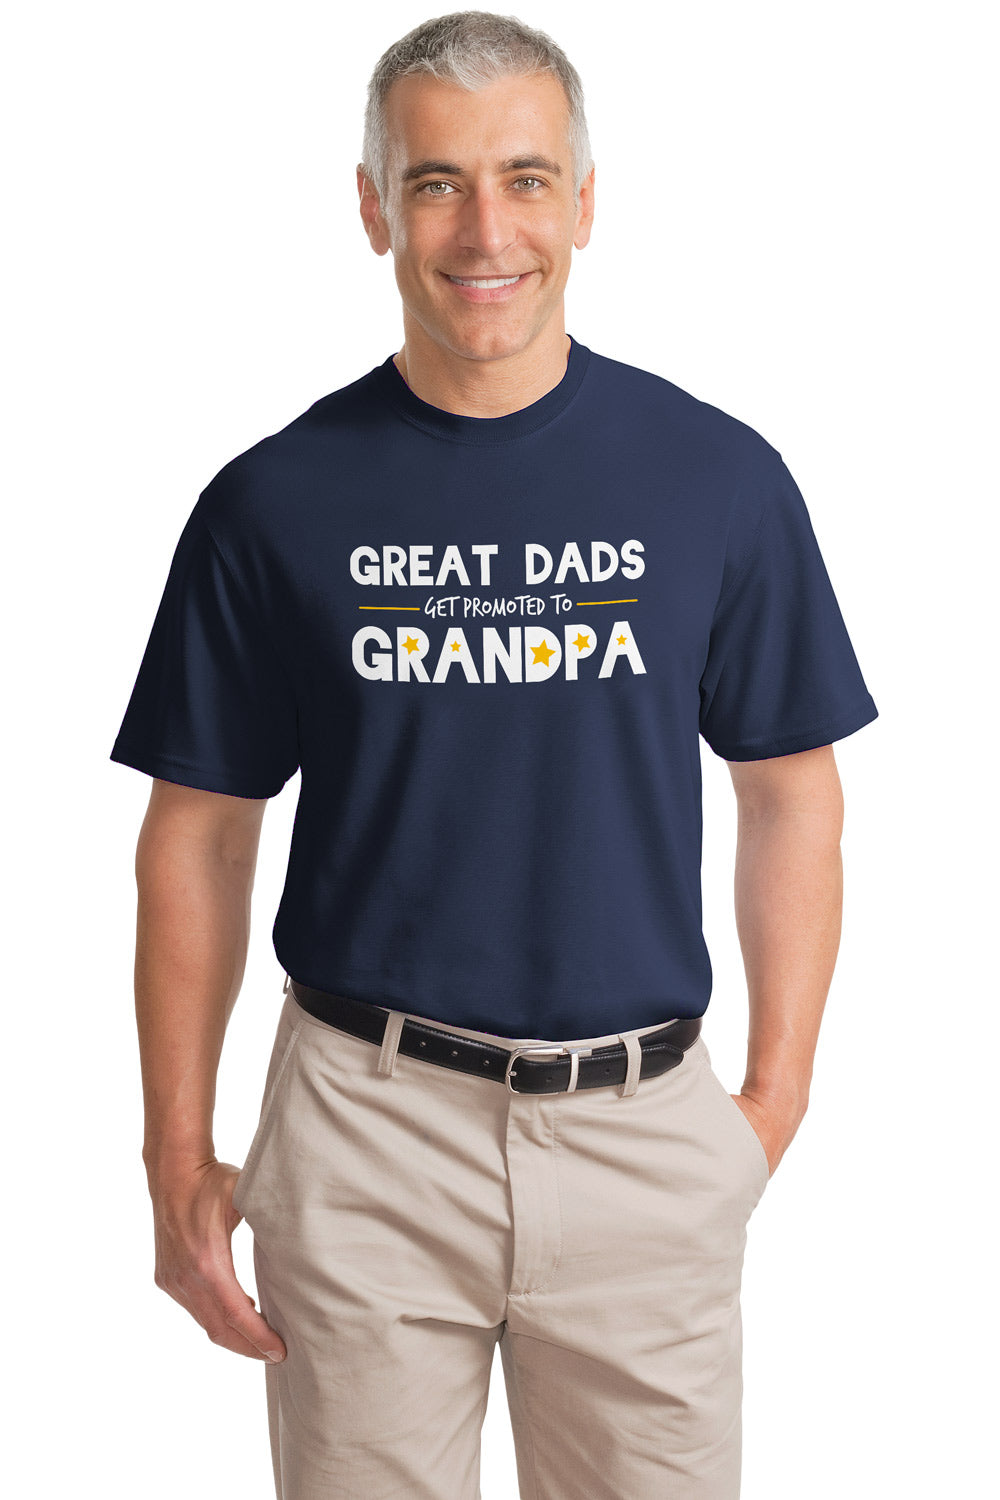 Great Dads get promoted to Grandpa! | Funny Grandfather Humor Unisex T-shirt